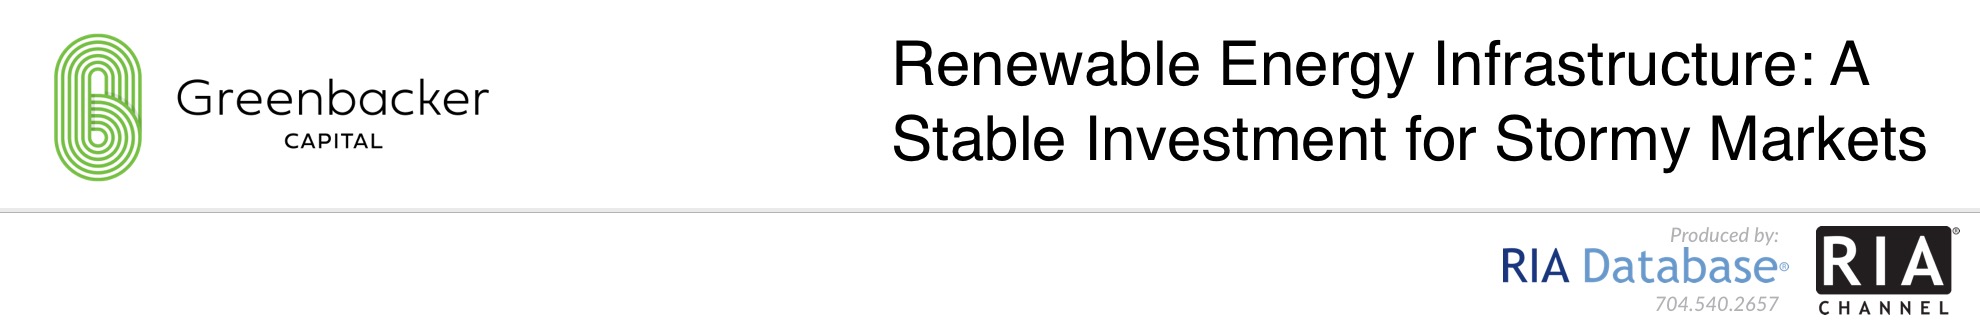 Renewable Energy Infrastructure: A Stable Investment for Stormy Markets